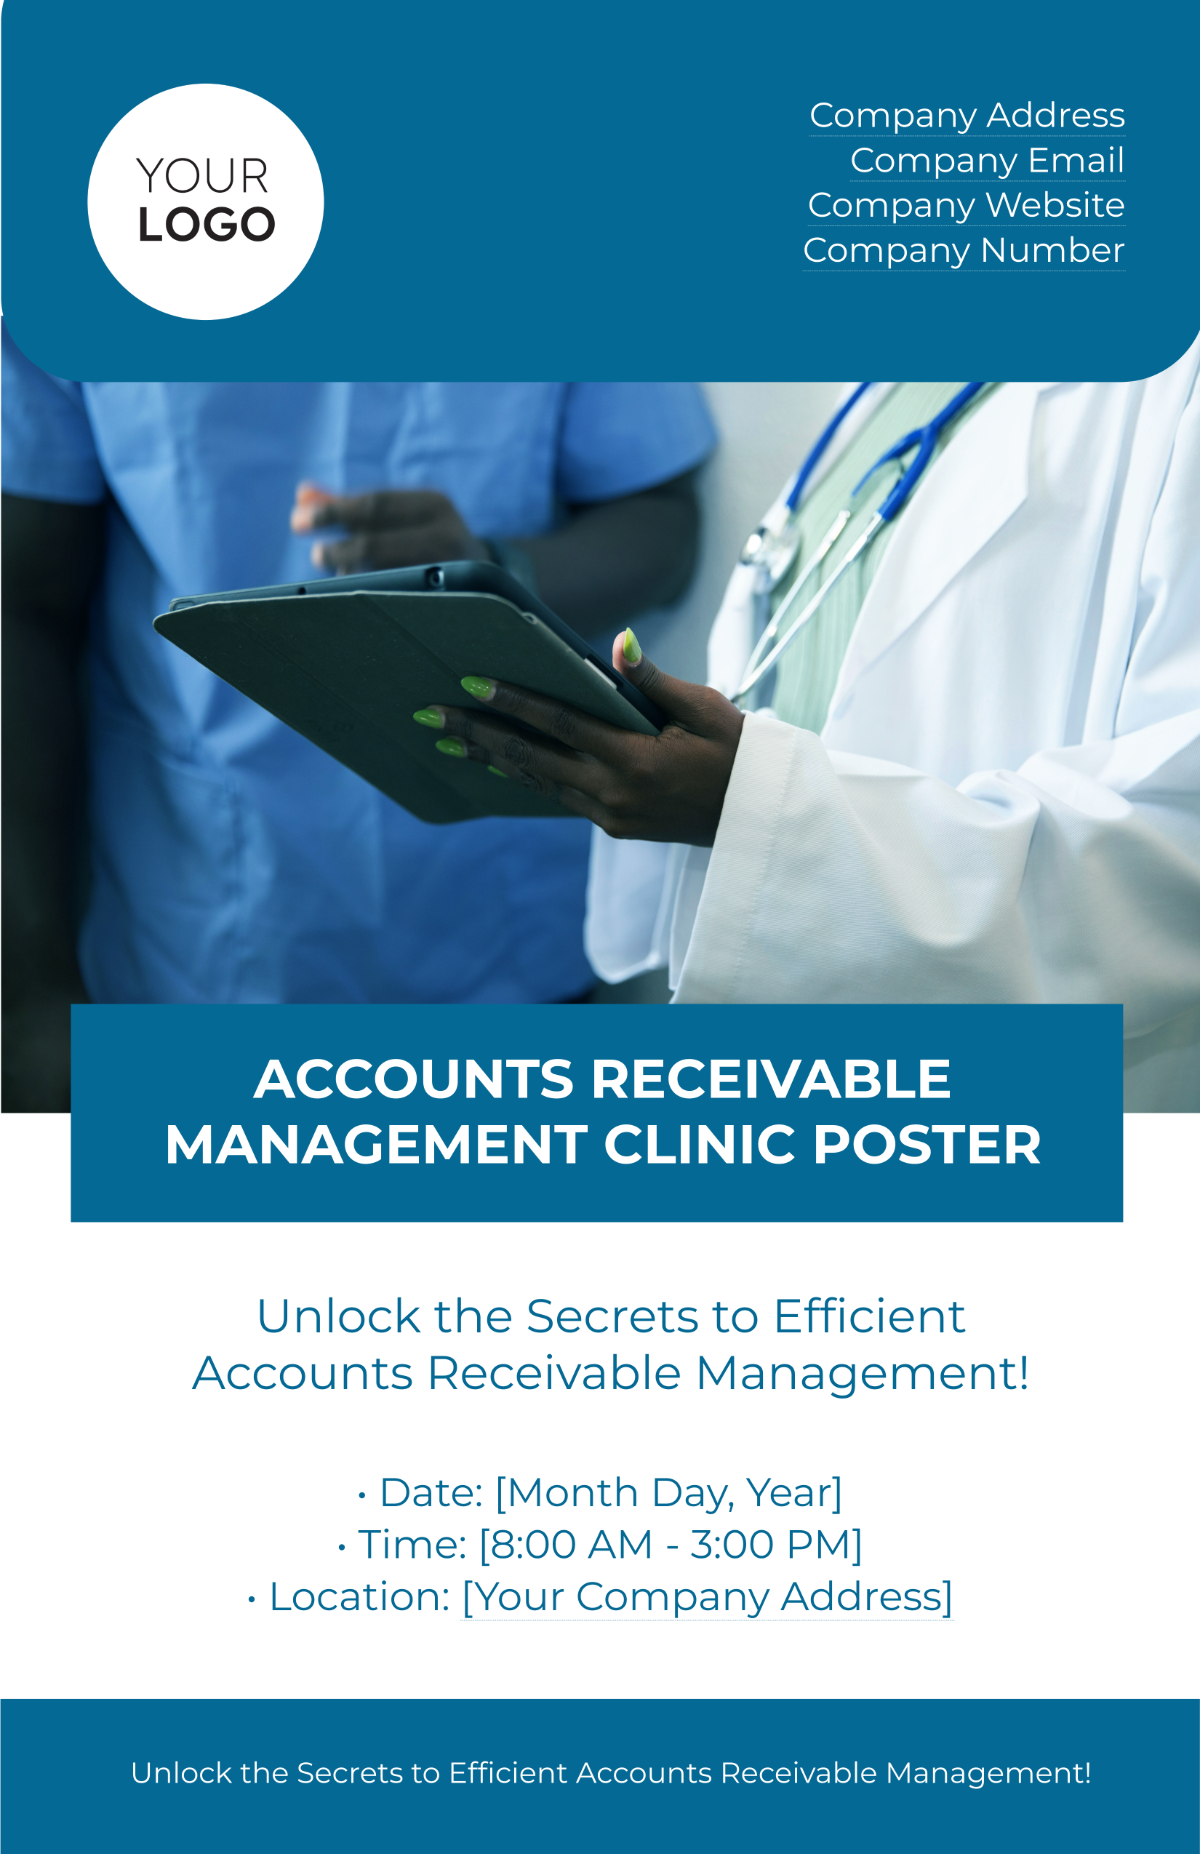 Free Accounts Receivable Management Clinic Poster Template